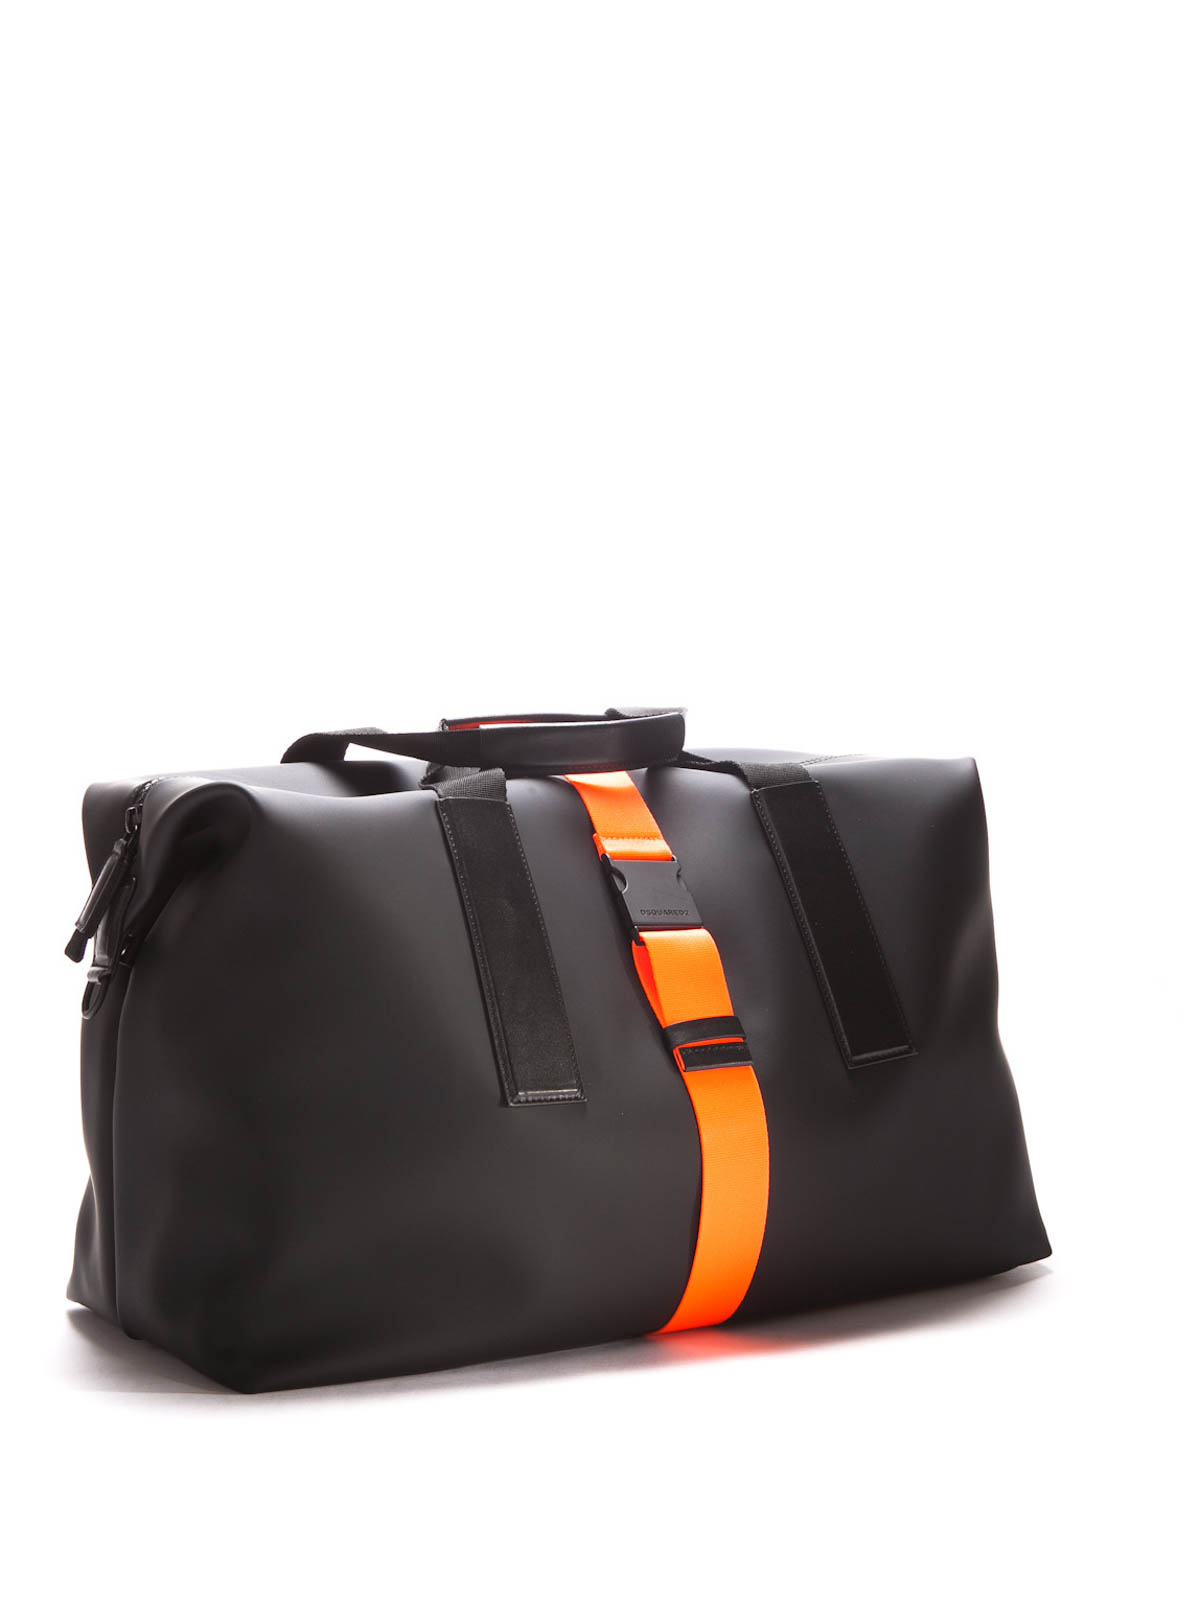 ORCIANI Micron leather duffle bag with shoulder strap. , color Orange